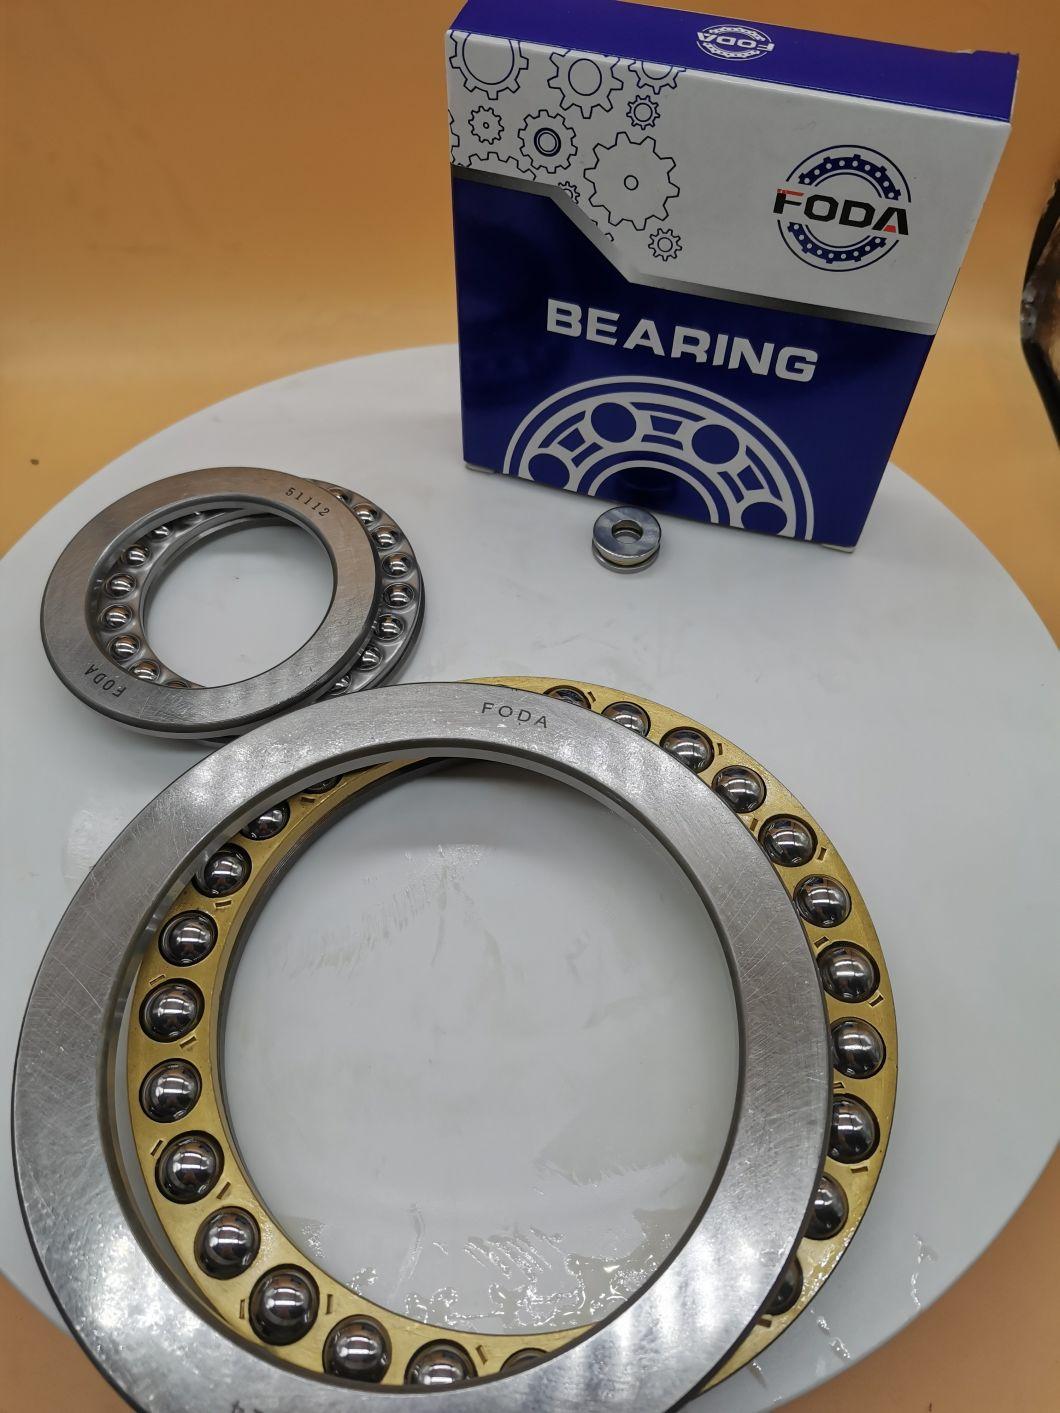 High Quality Like /Low Speed Reducer/Thrust Ball Bearings for Crane Hooks/Rolling Bearings/Thrust Ball Bearings for Jacks/ Thrust Ball Bearings of 51218